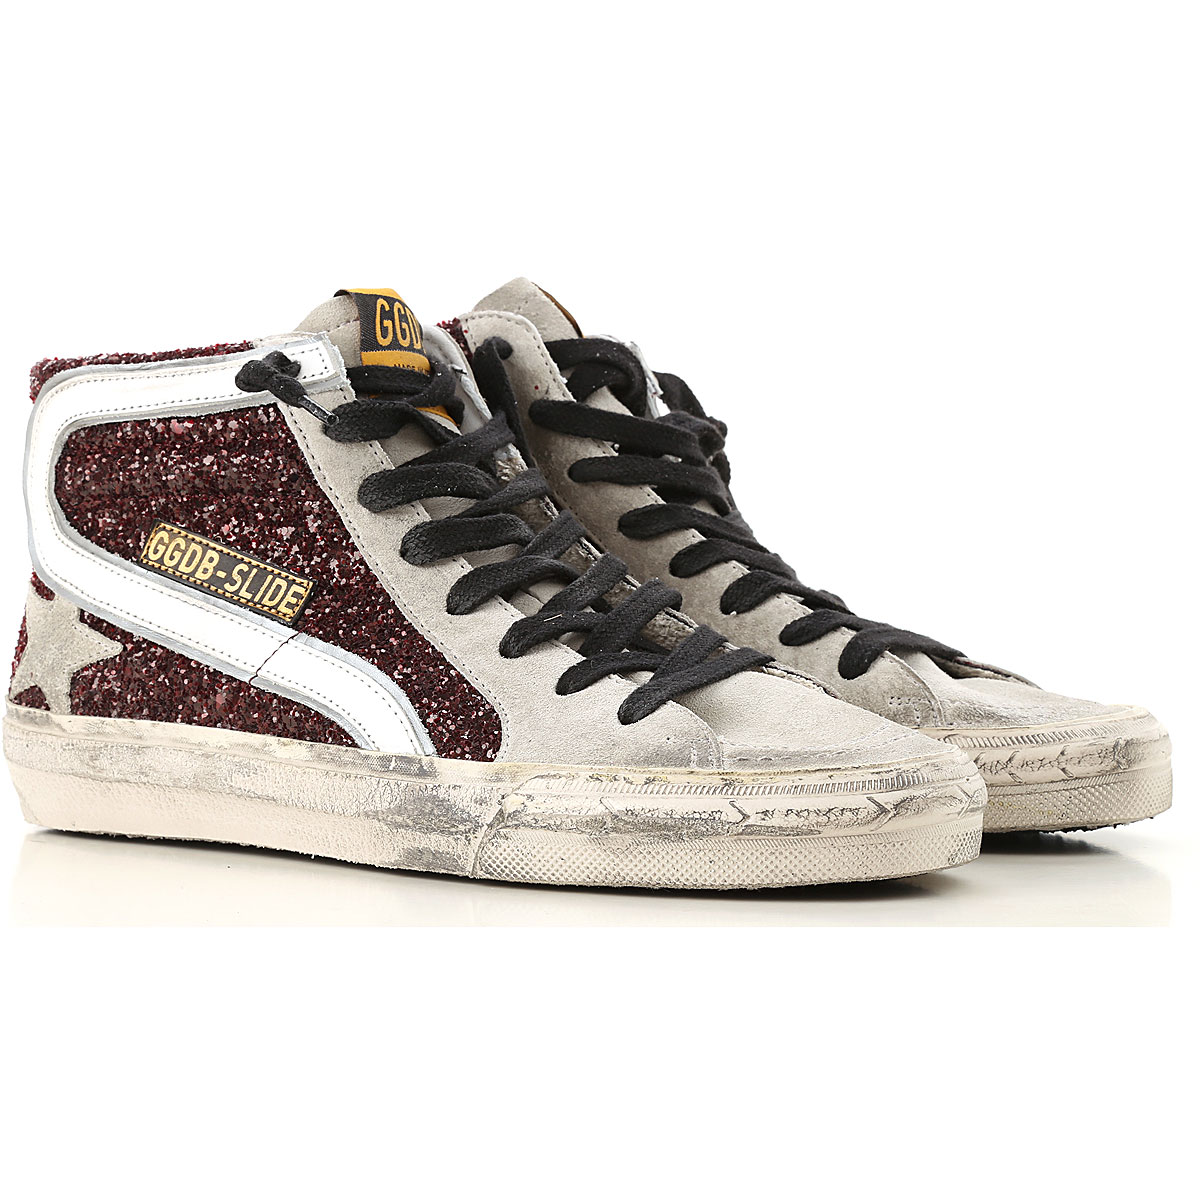 Womens Shoes Golden Goose, Style code: g33ws595-z4-